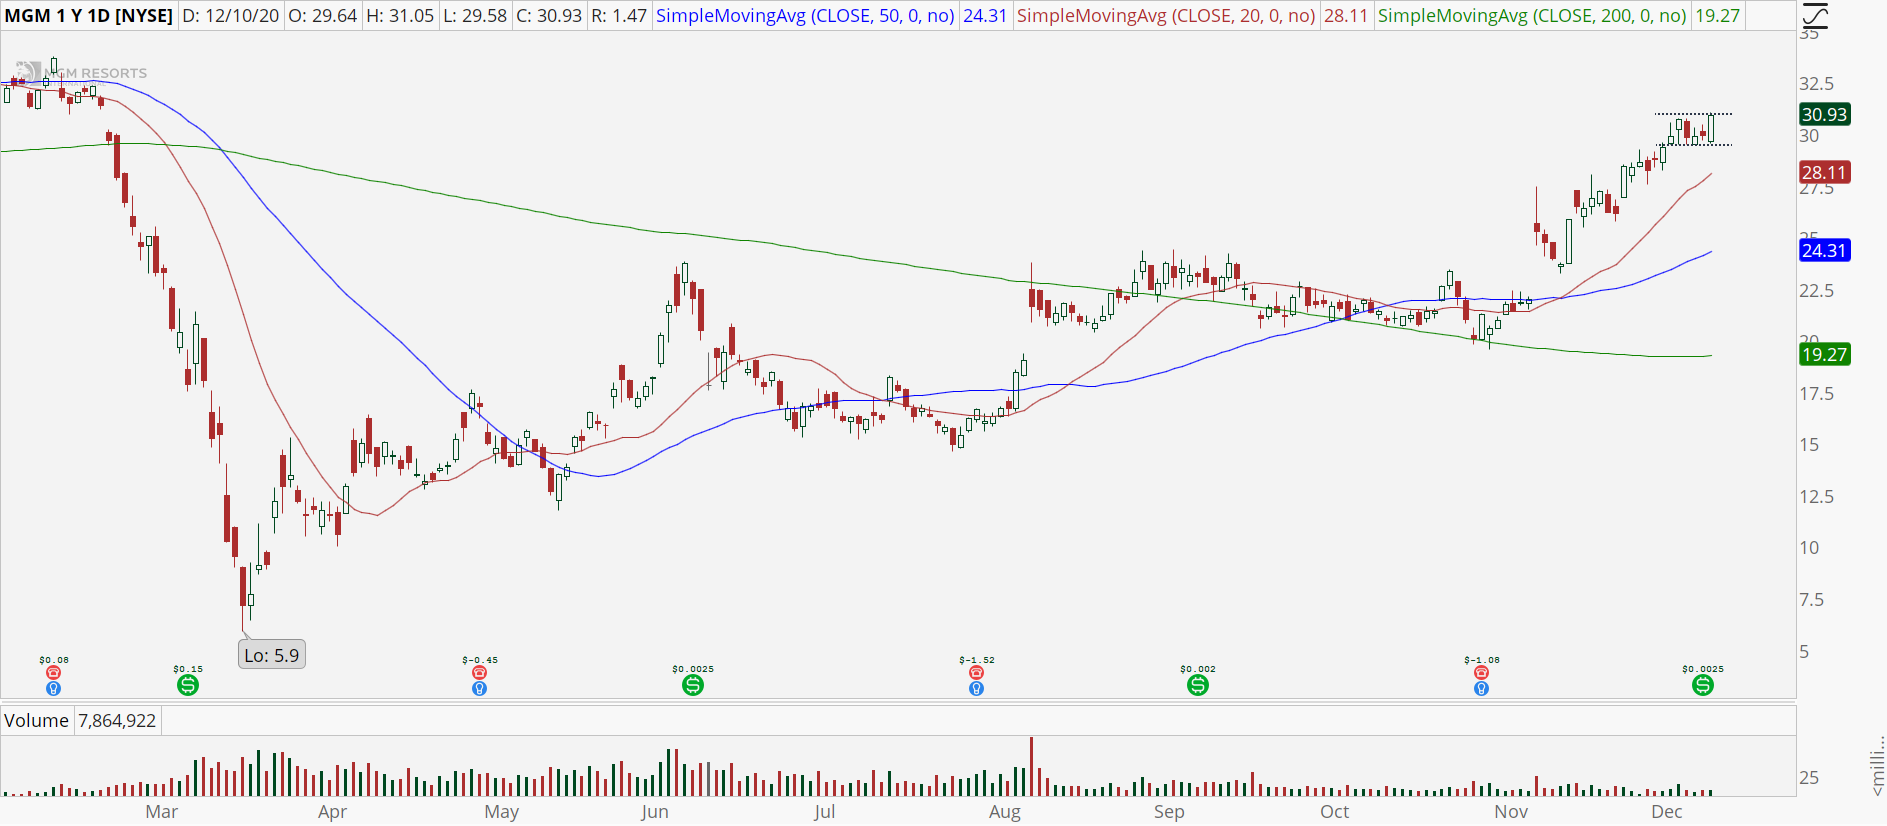 MGM Resorts (MGM) chart with high base breakout